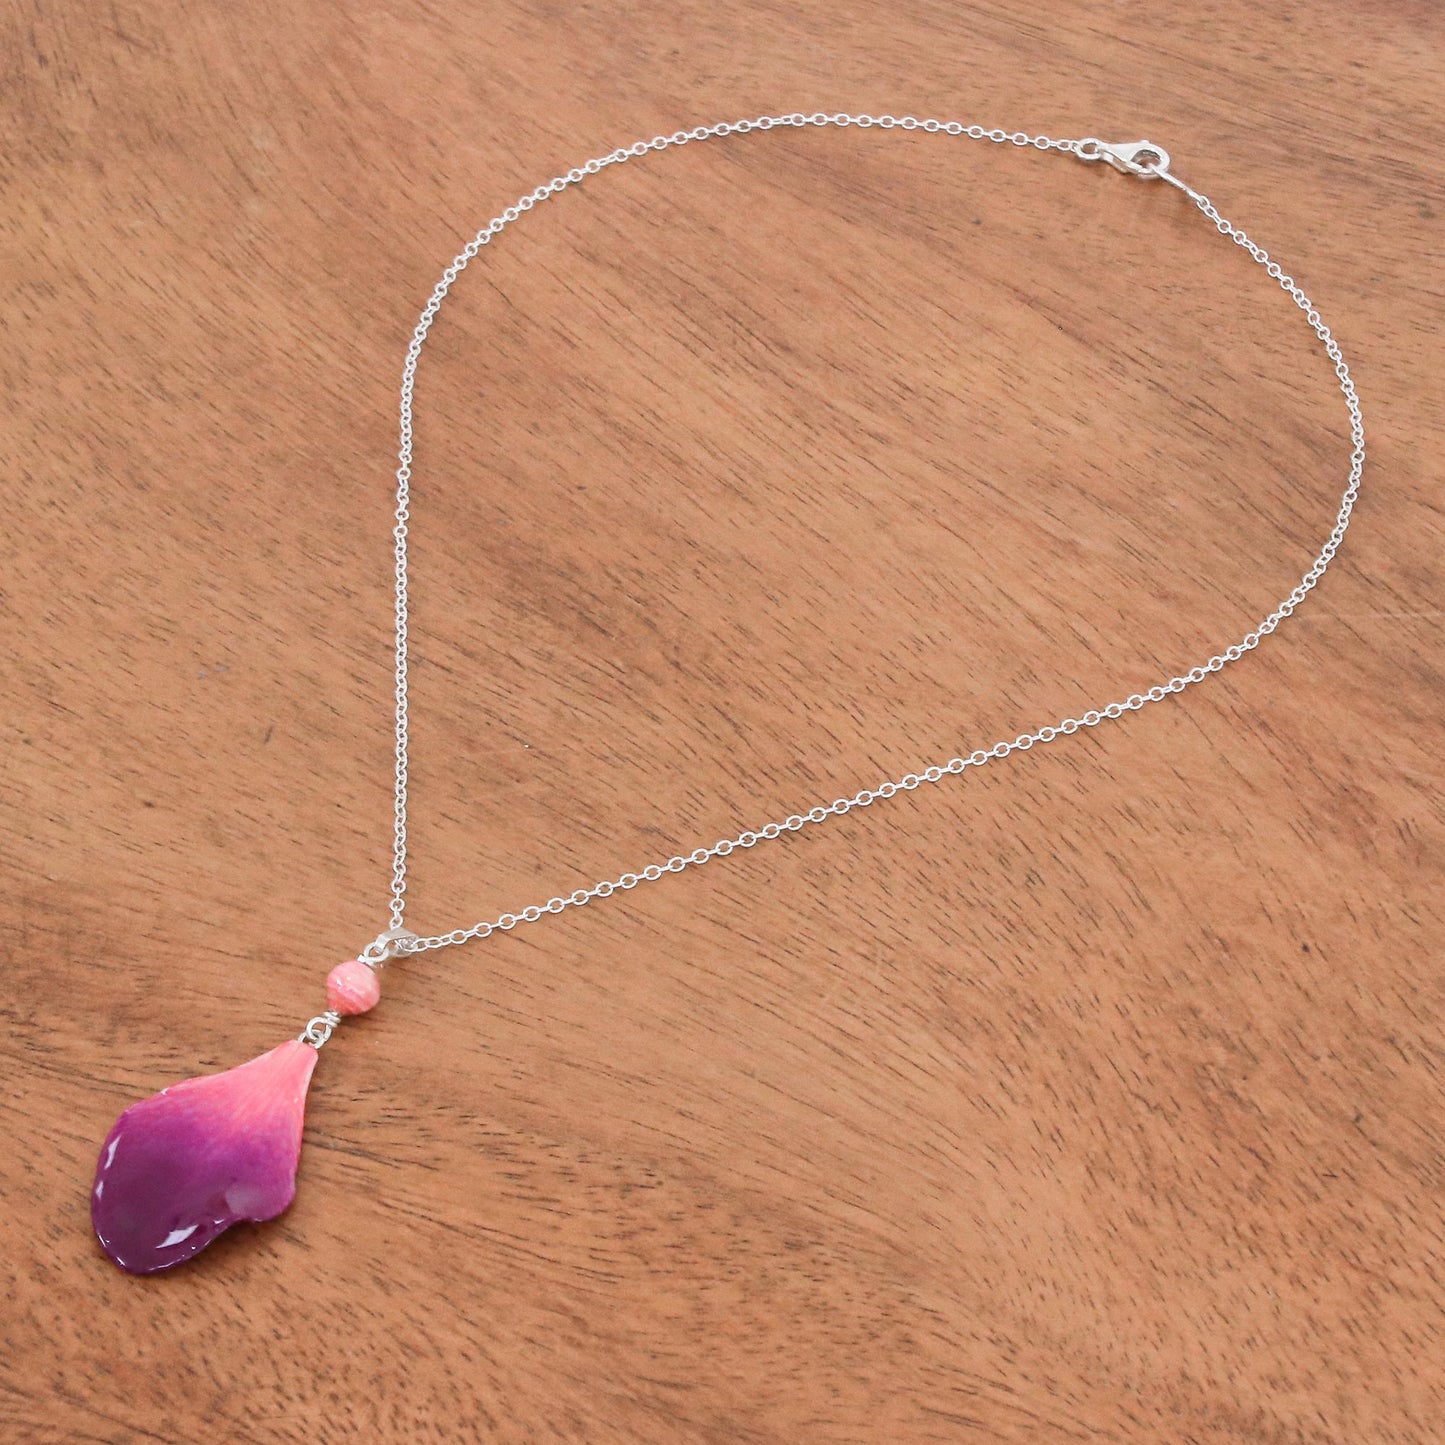 Bloom Basket in Fuchsia Resin-Coated Orchid Petal Pendant Necklace